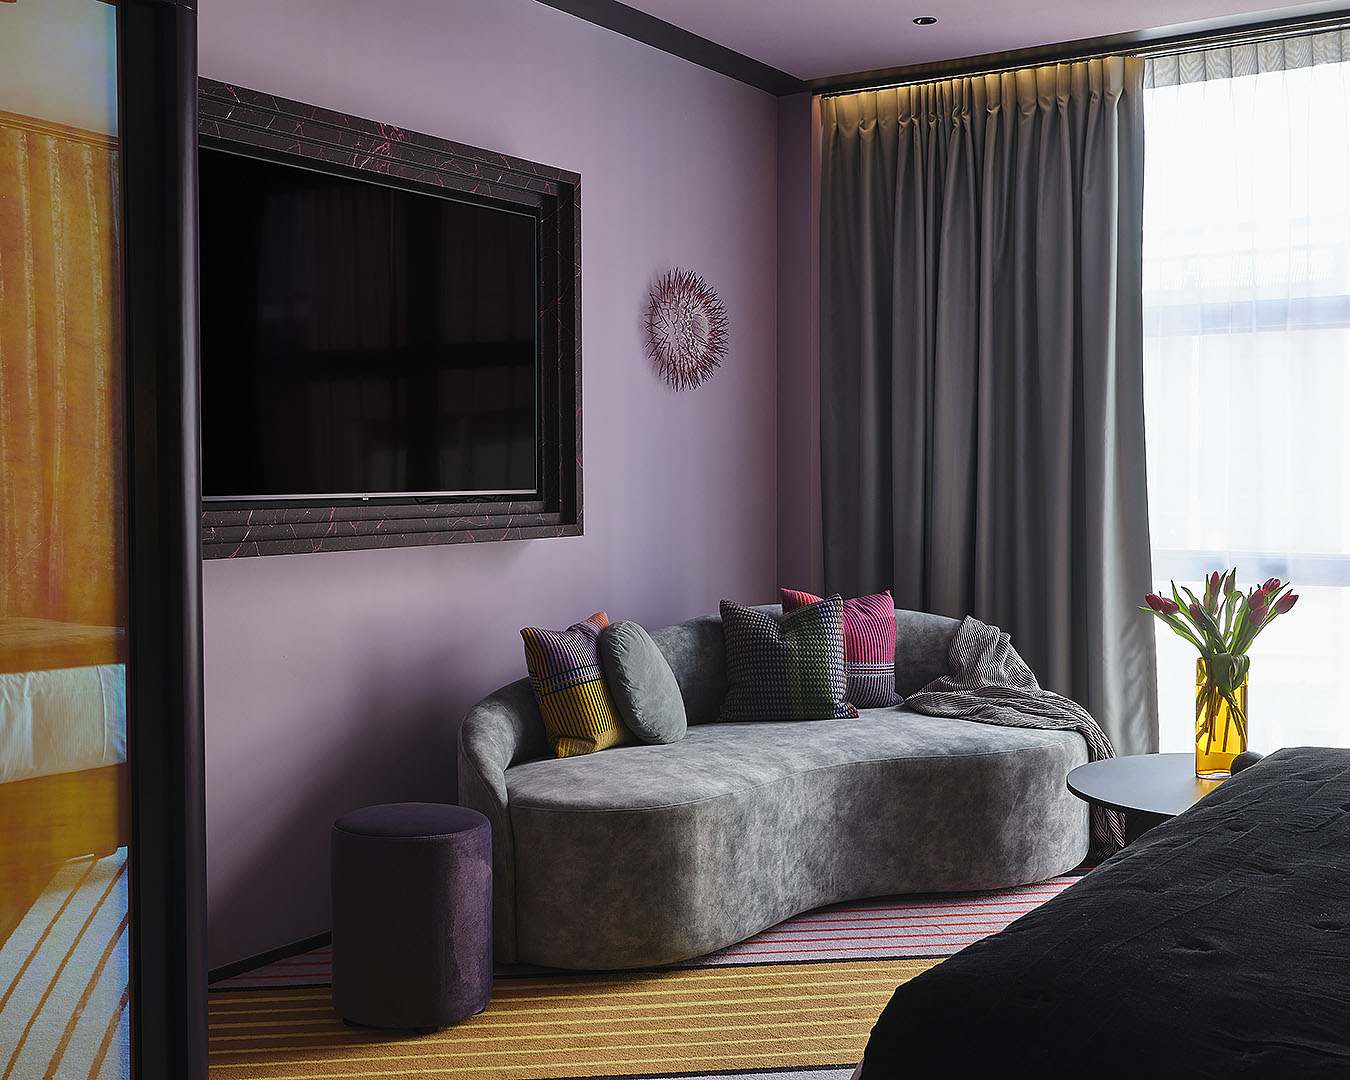 The Habitat King room at Naumi Wellington, one of the best hotels in Wellington.